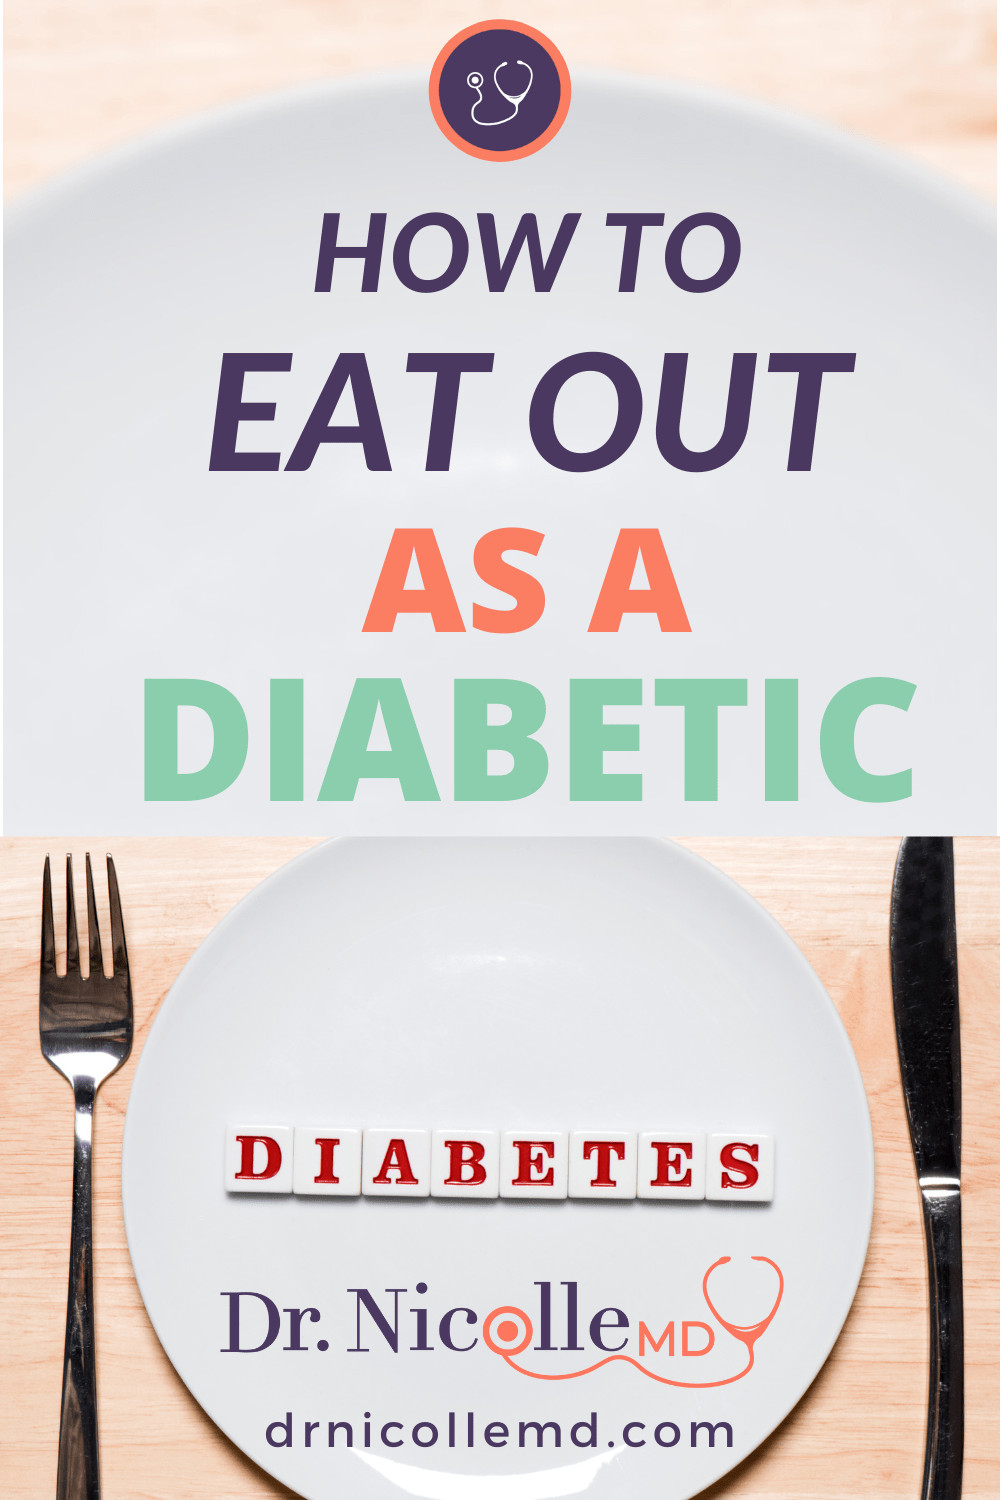 How to Eat Out as a Diabetic